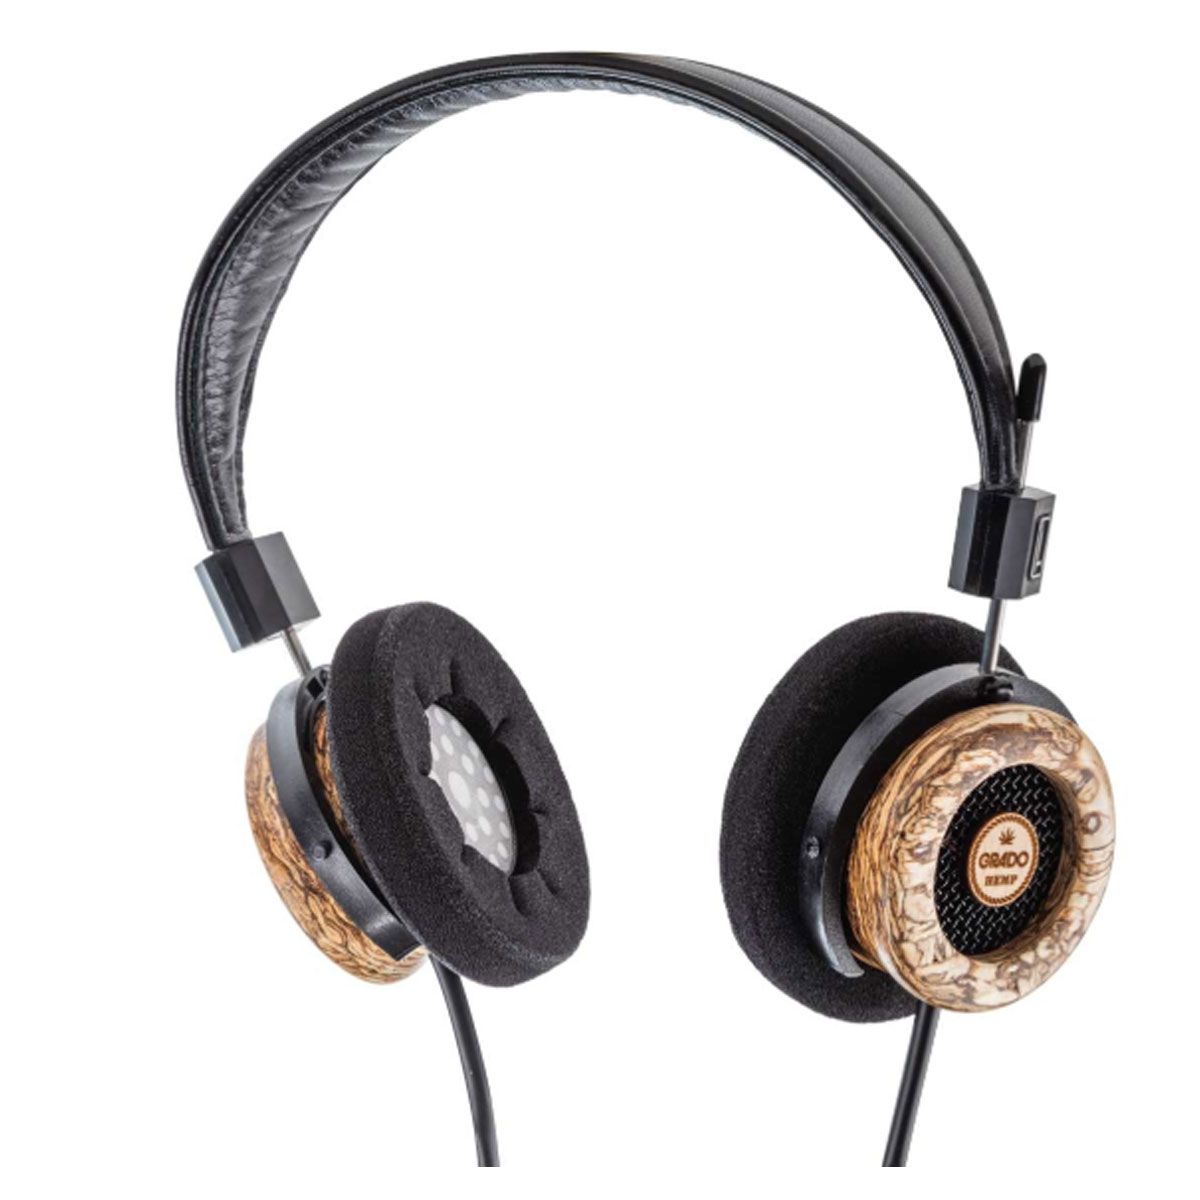 The Hemp Headphone
Limited Edition, side view